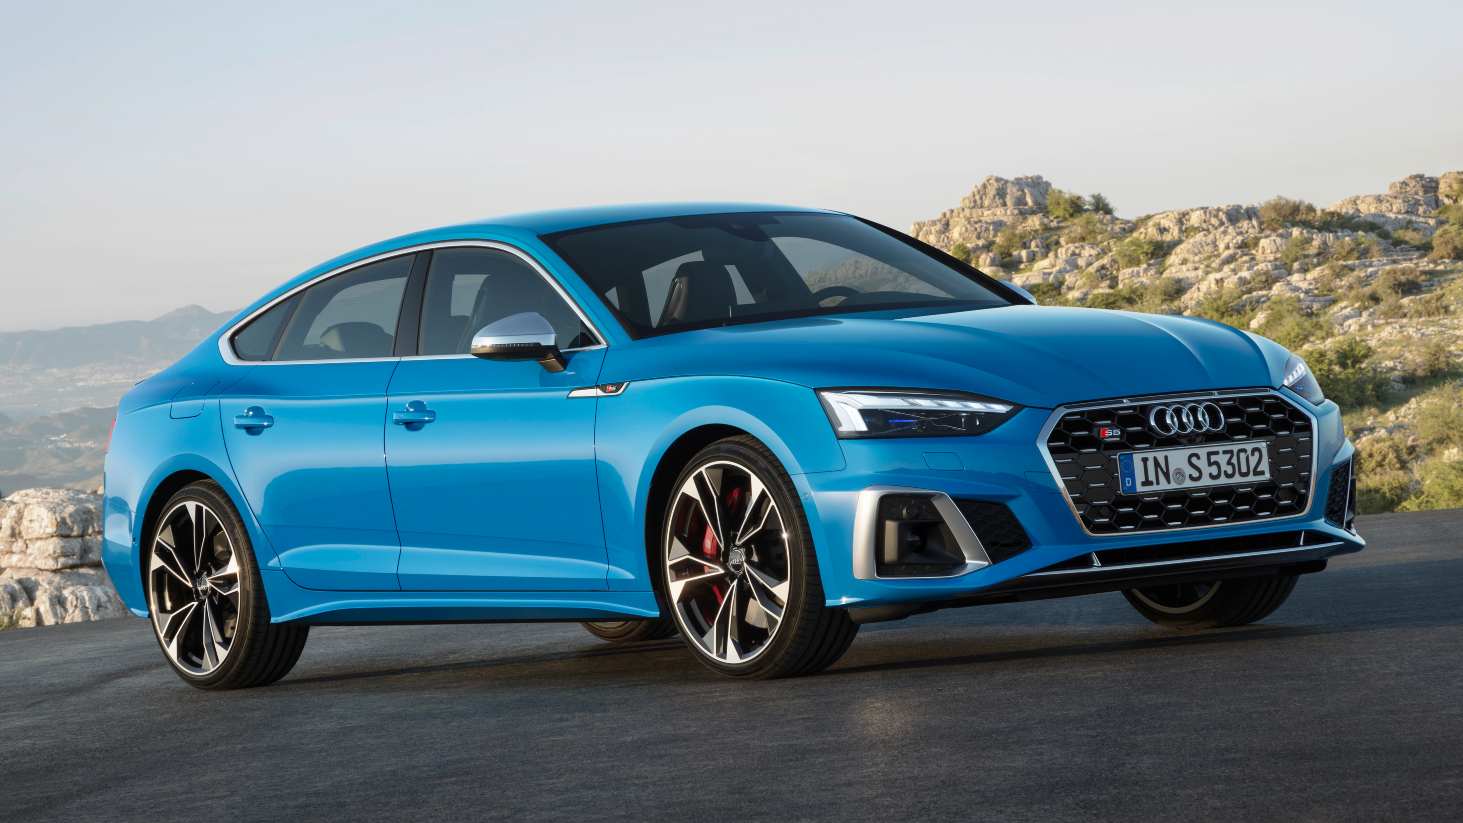  Audi S5 Sportback facelift to be launched in India on 22 March, gets 354 hp V6 petrol engine